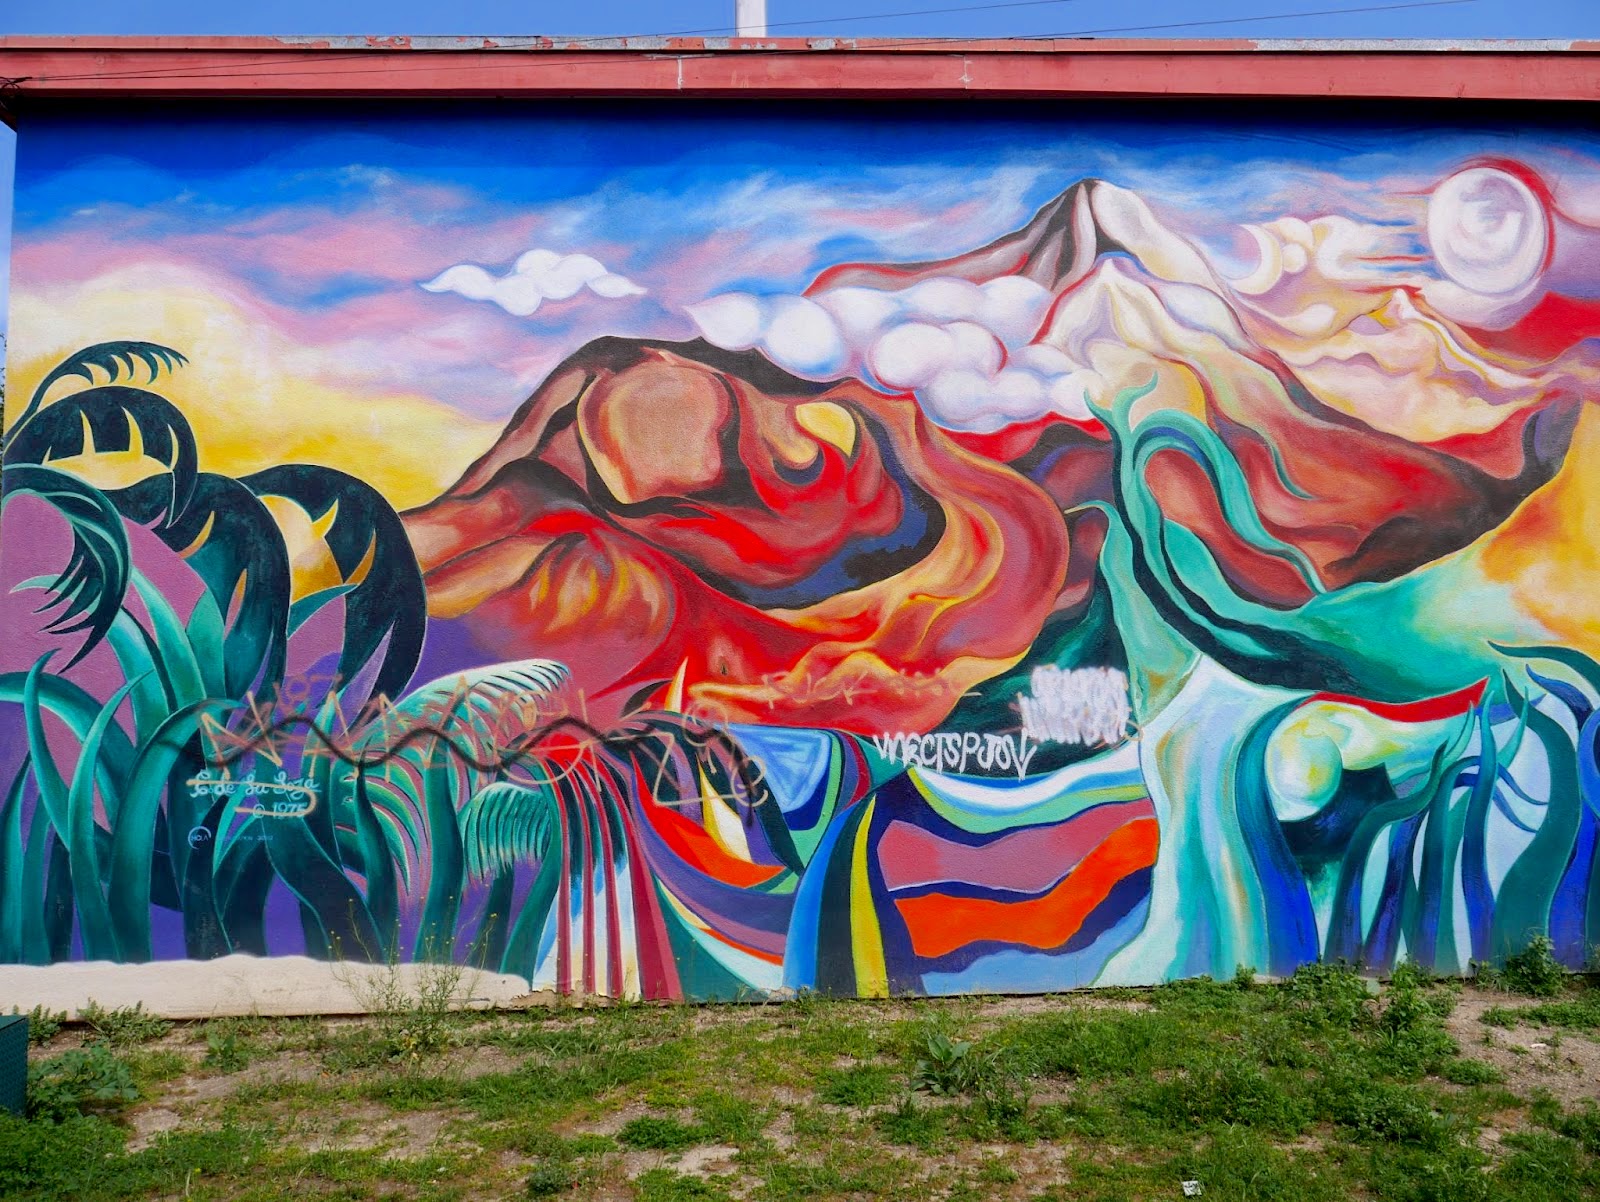 An abstract mural of an island paradise with a colorful mountain in the distance